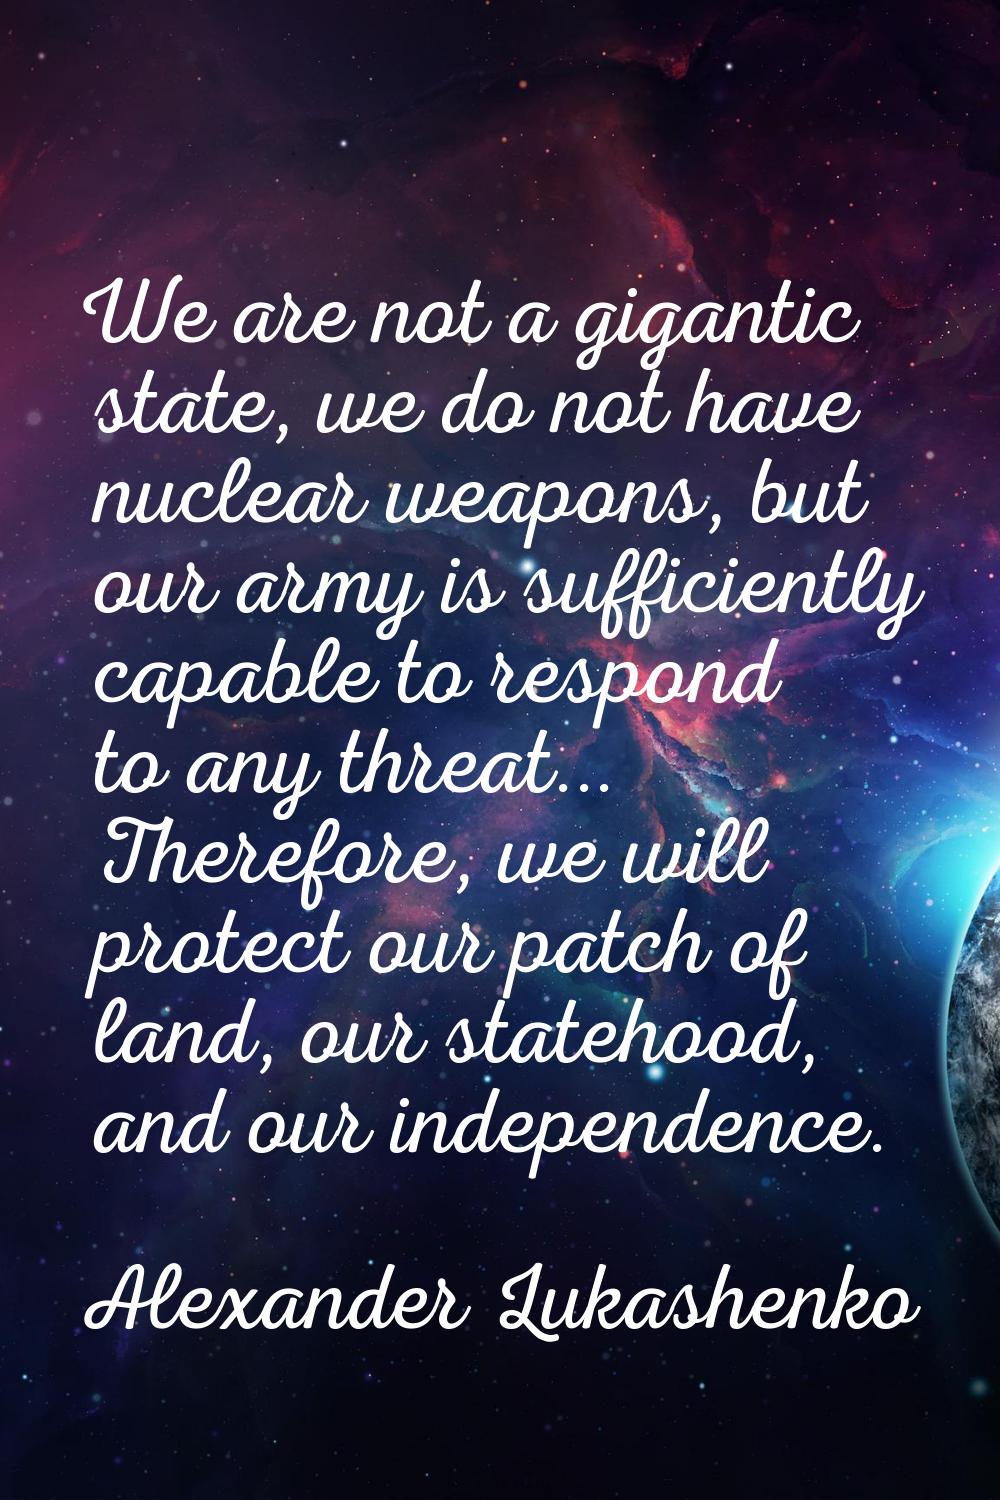 We are not a gigantic state, we do not have nuclear weapons, but our army is sufficiently capable t